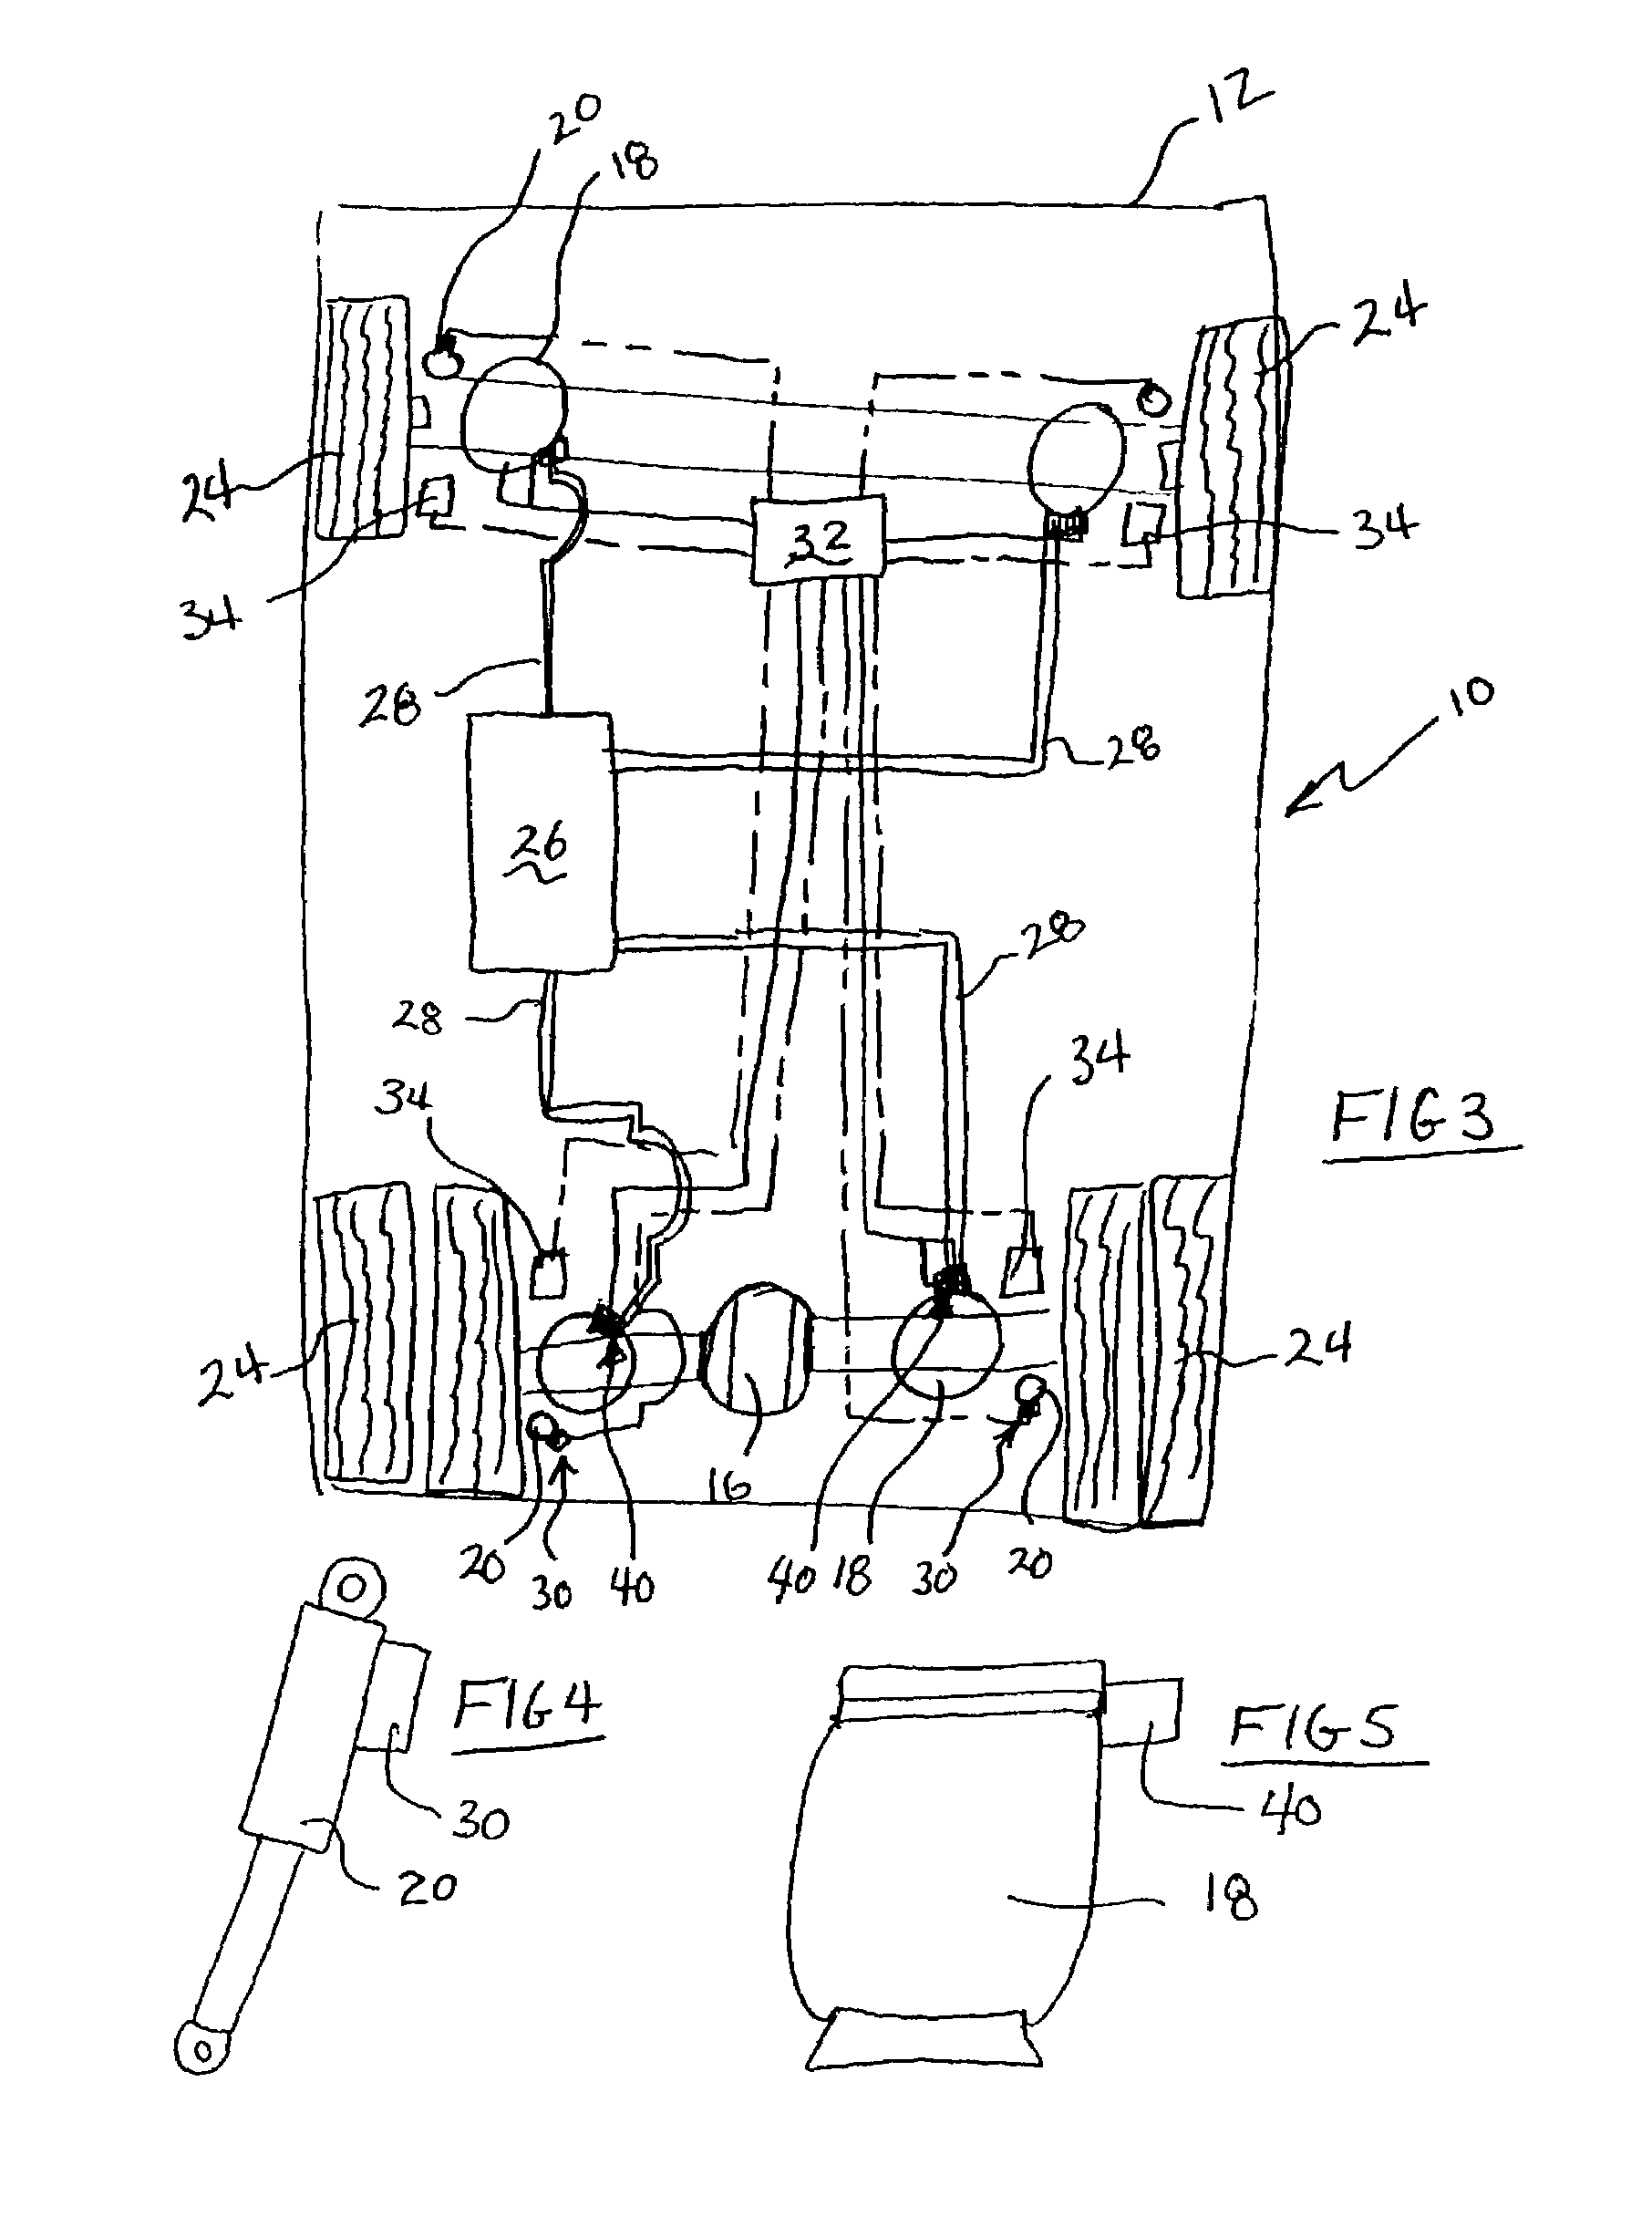 Suspension with integrated leveling and stabilization mechanisms